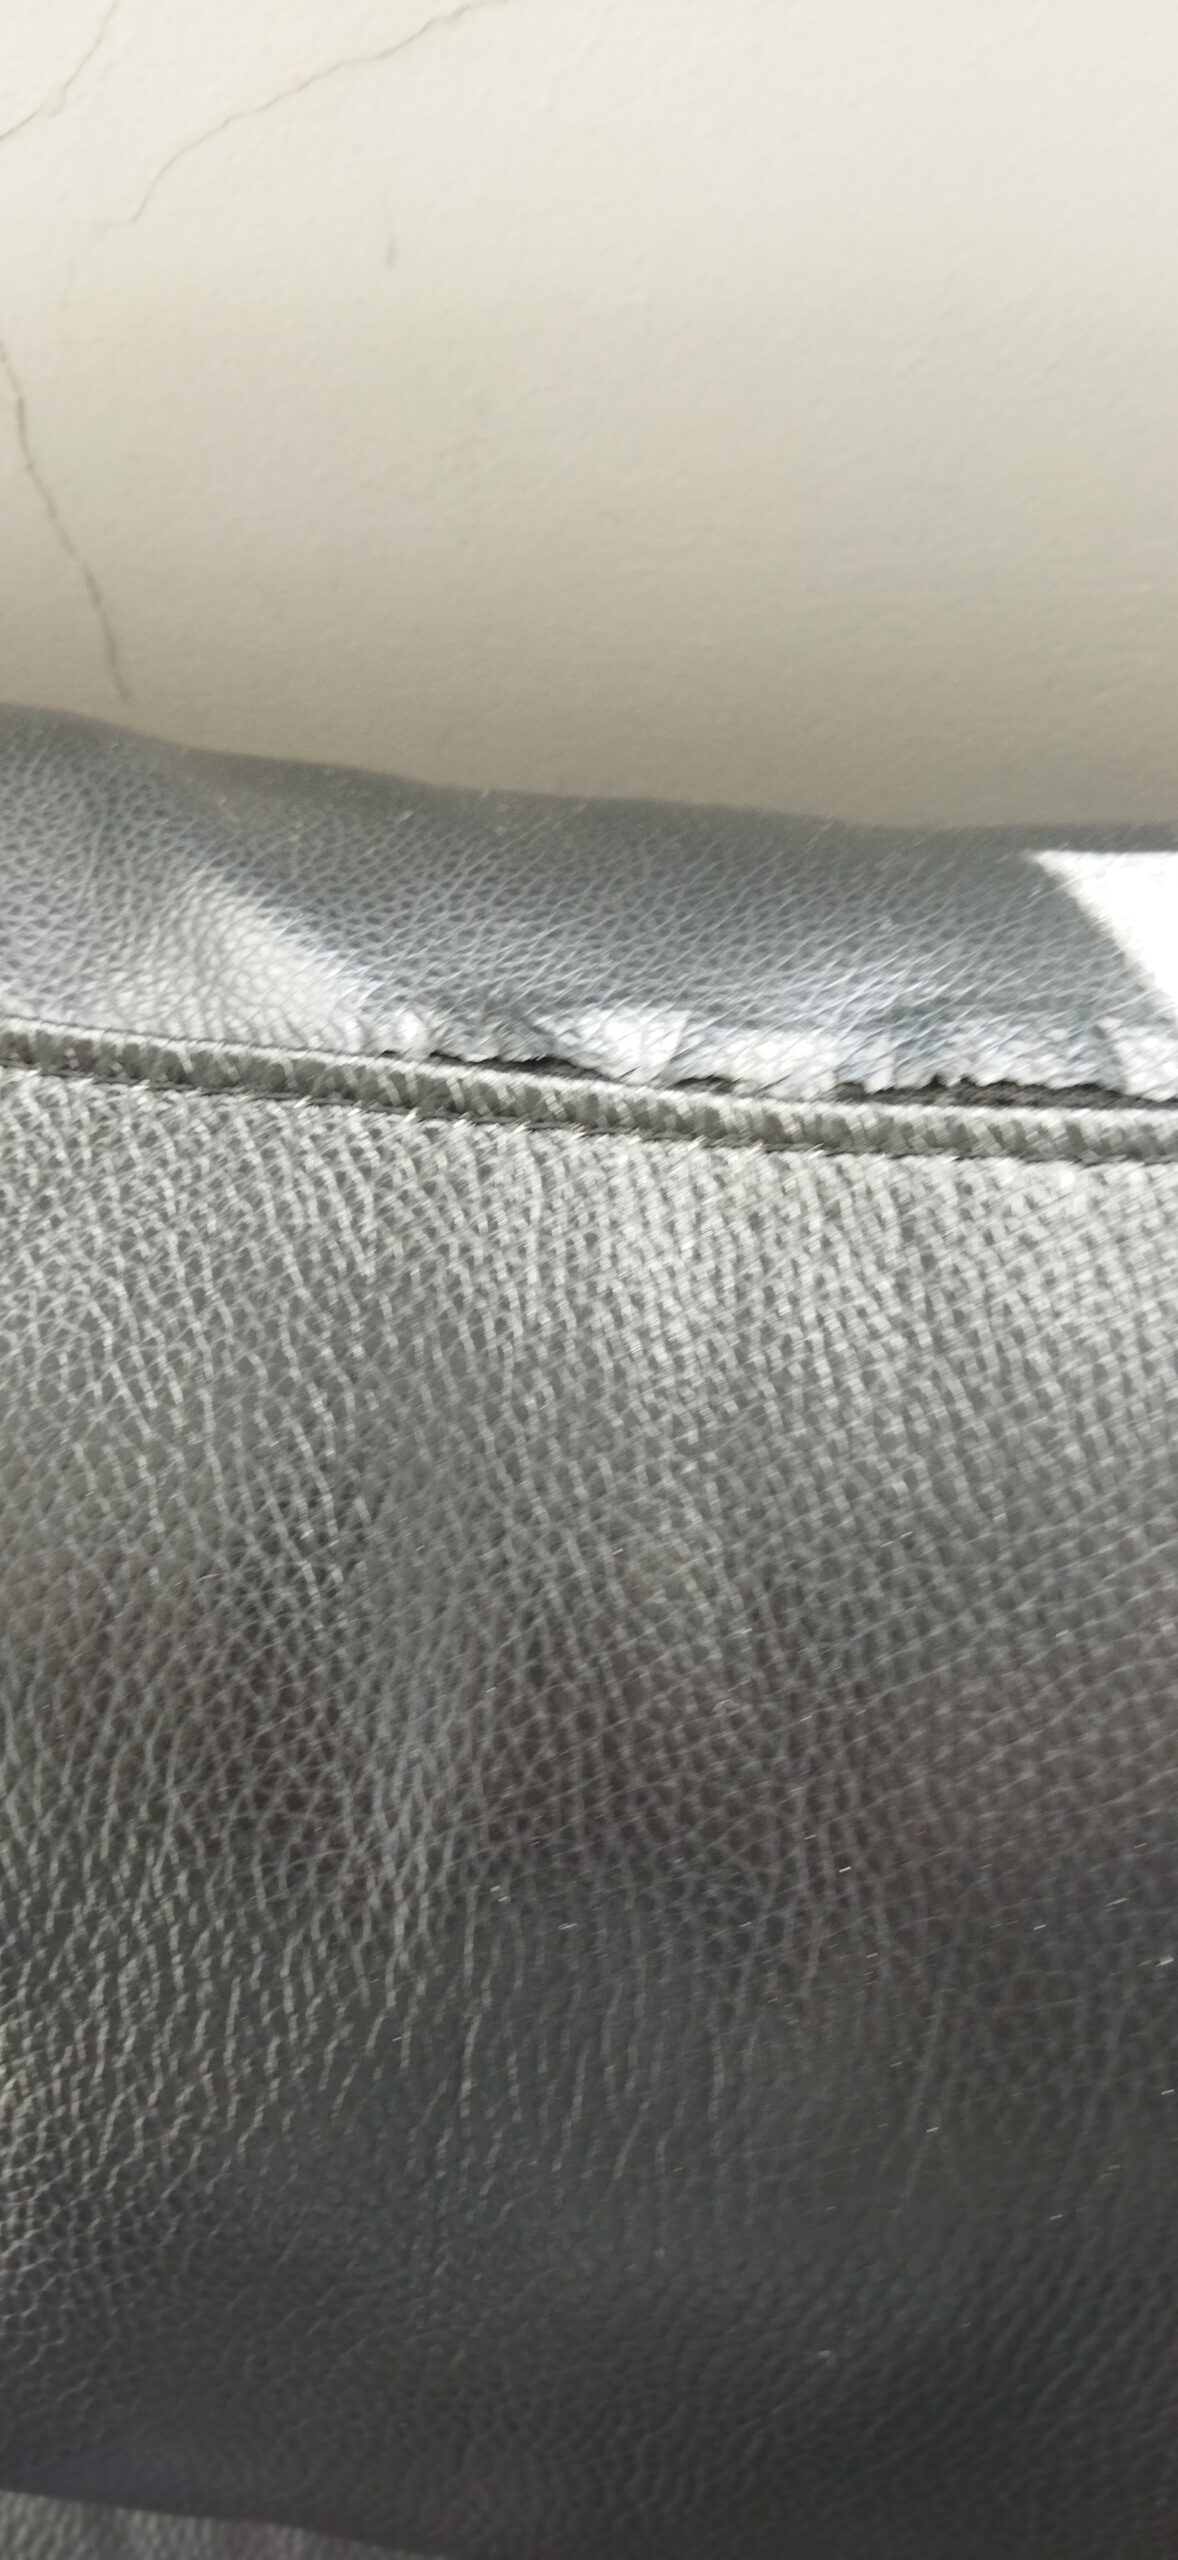 Sofas manufacturing defects